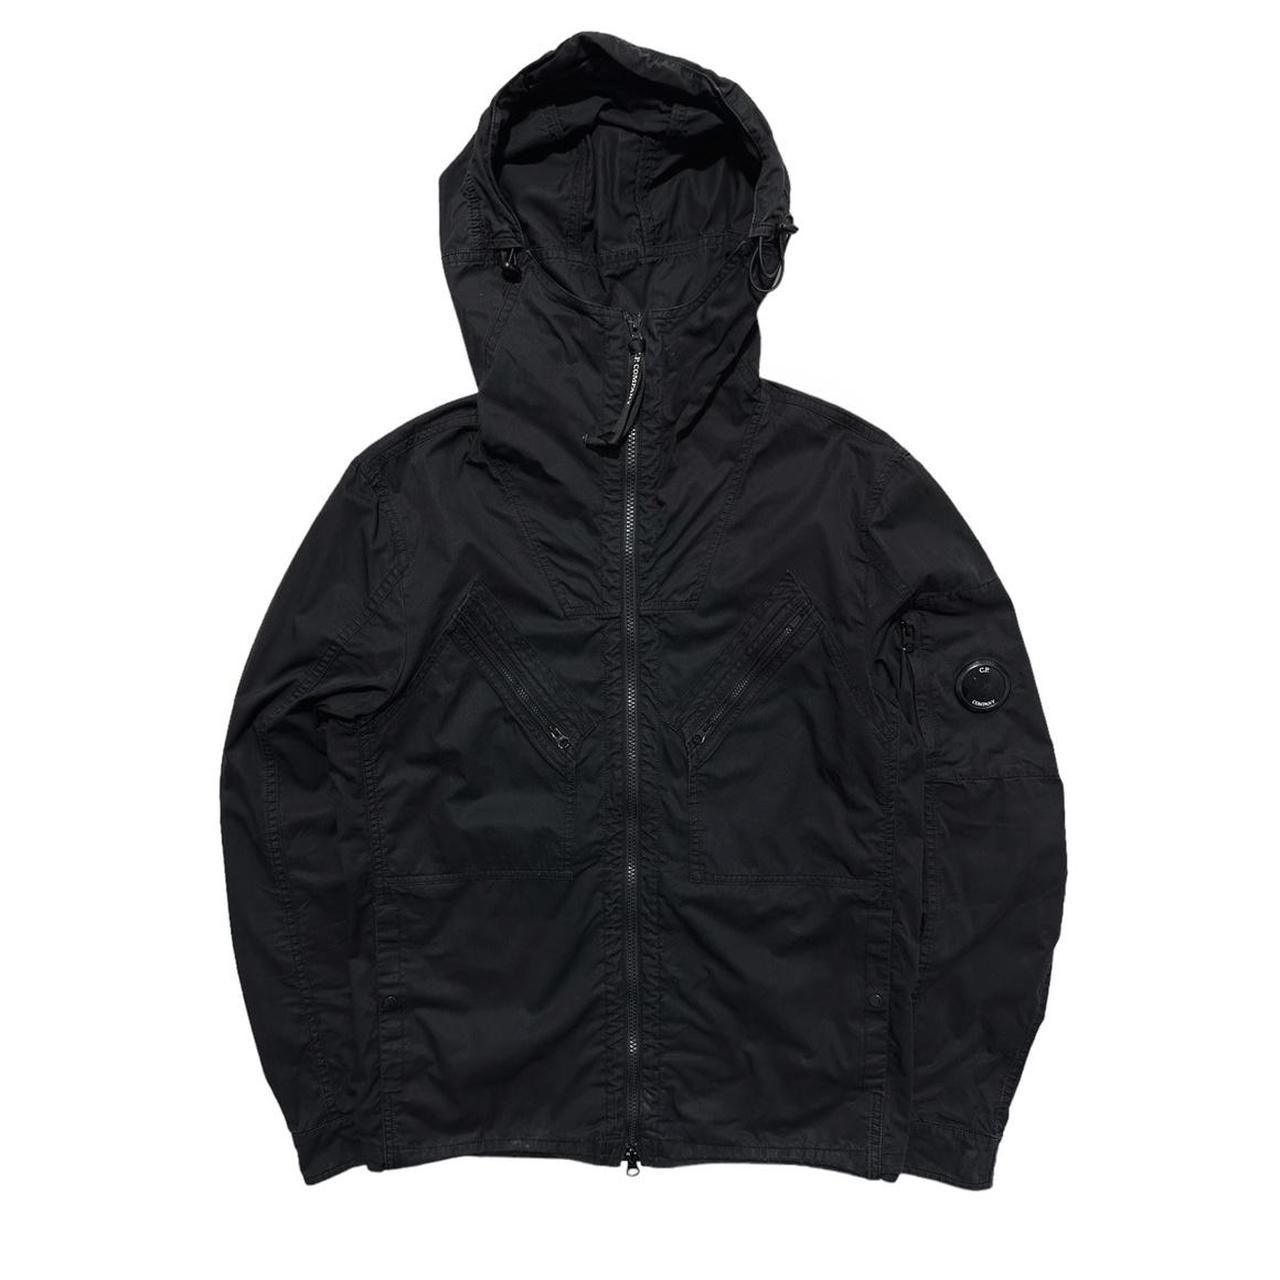 CP Company Black Canvas Jacket - Known Source